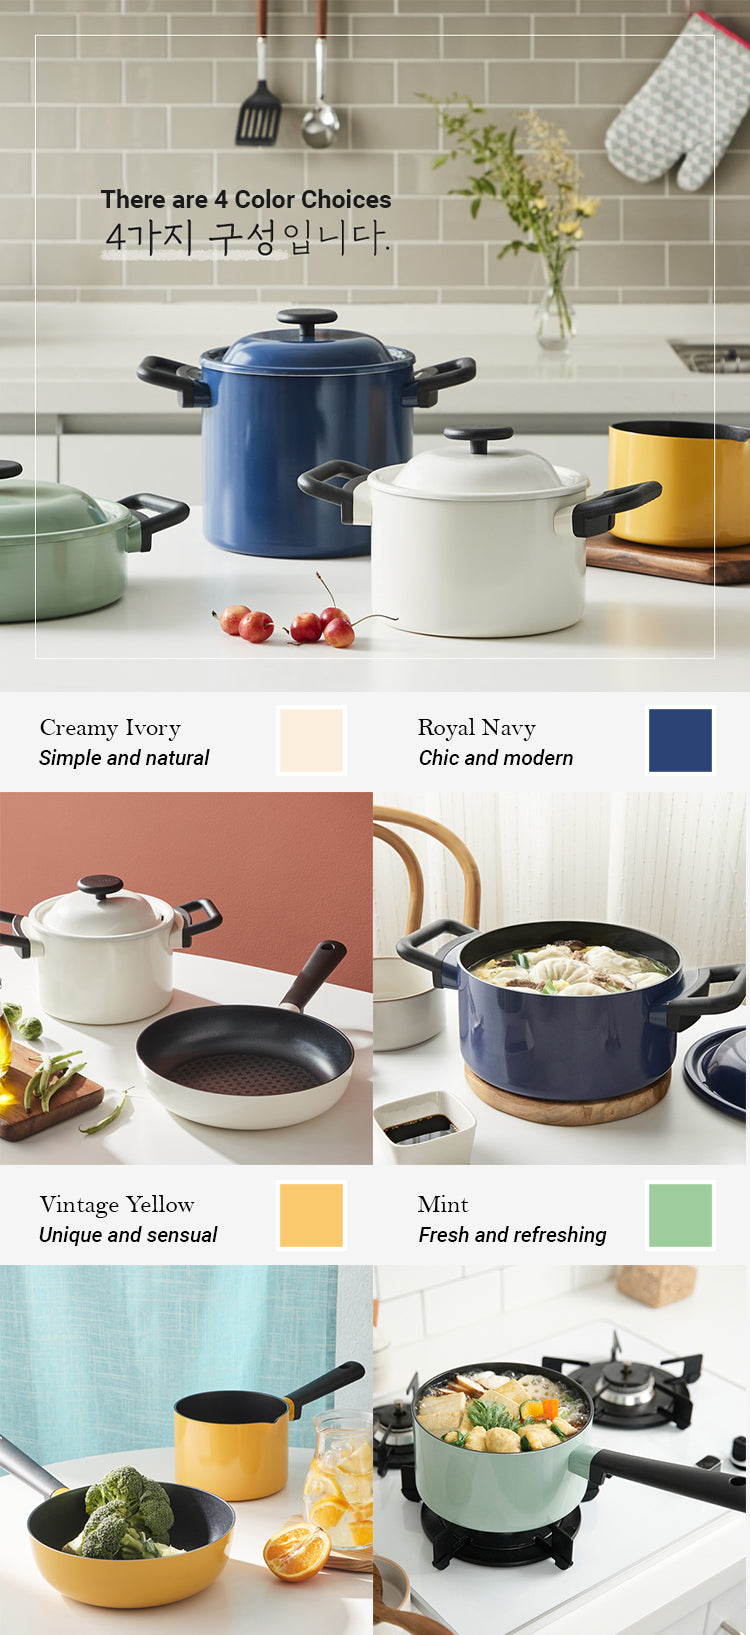 Decore pots and pans come in four different colors: Vintage Yellow, Royal Navy, Creamy Ivory, and Mint.